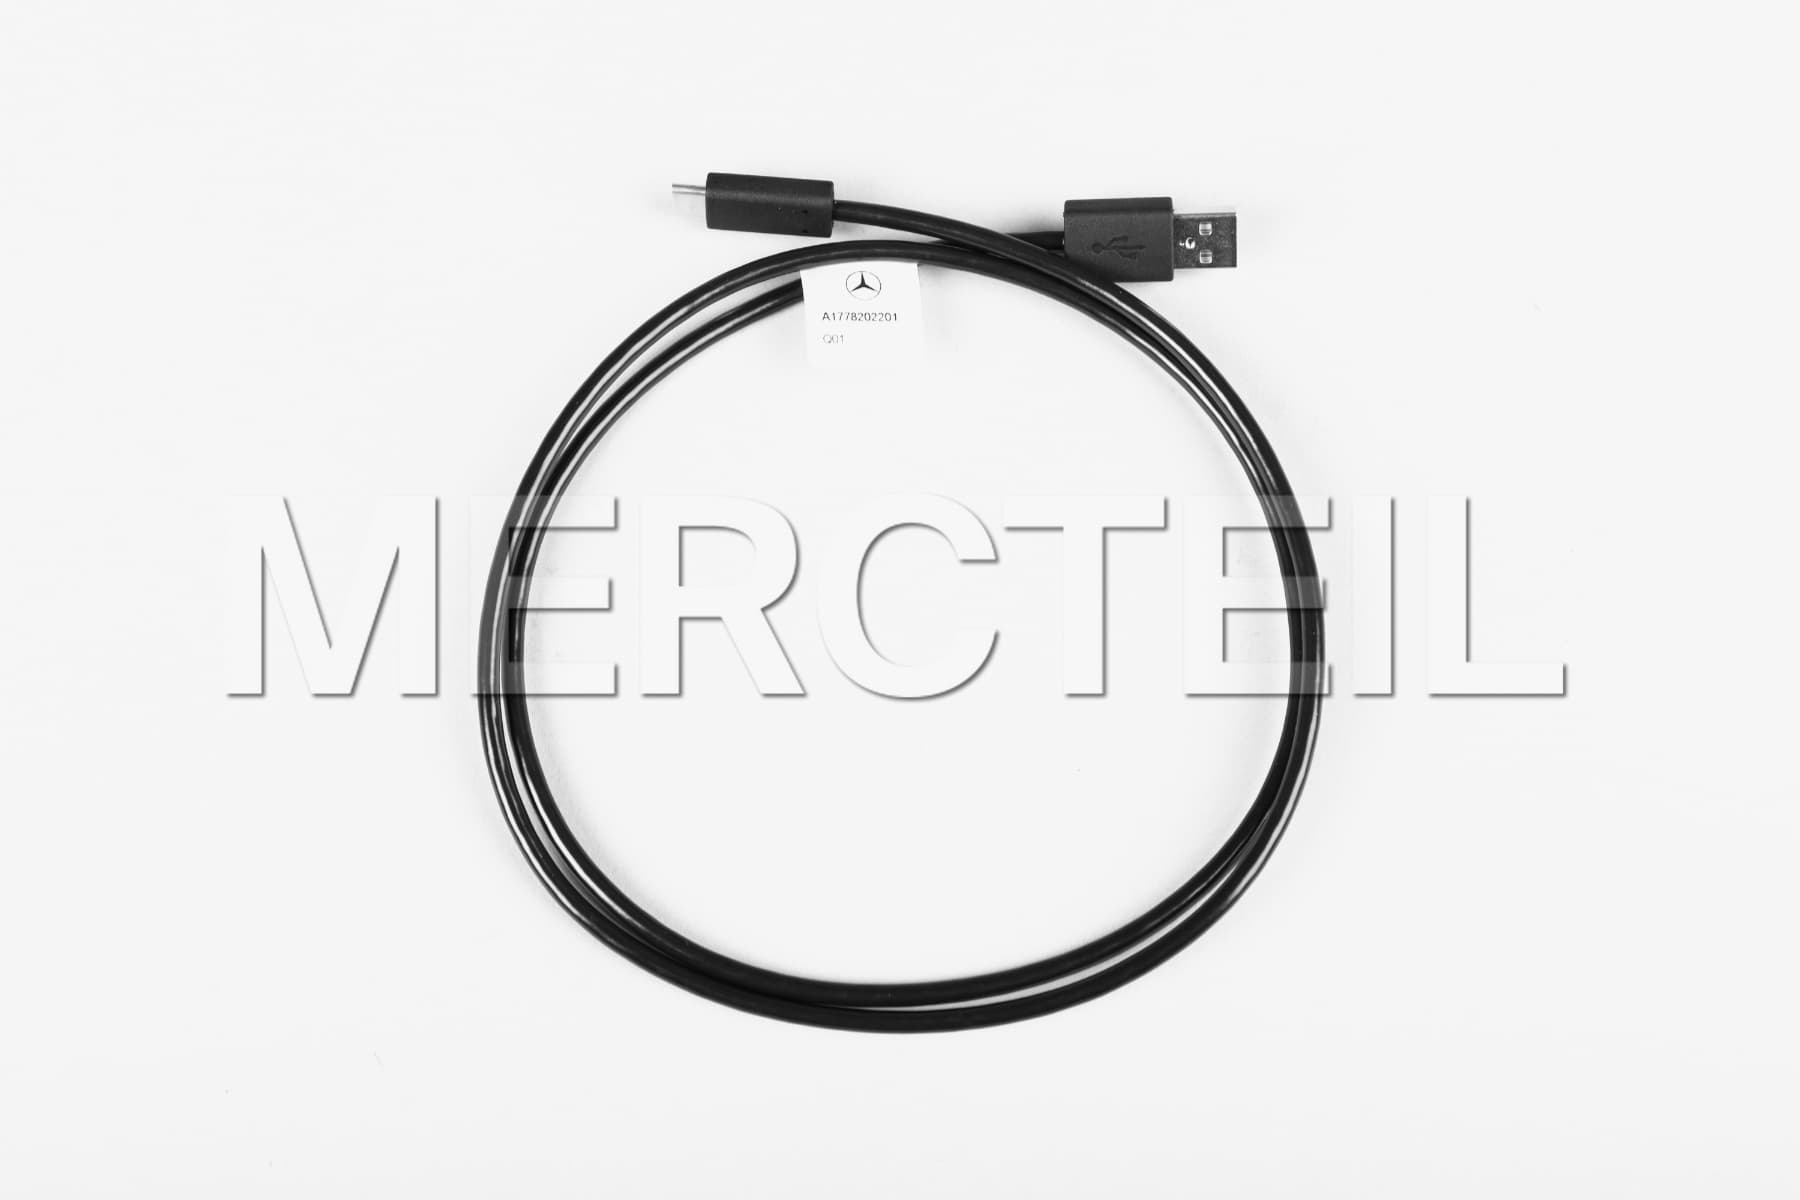 USB Type-C Media Interface Consumer Cable Genuine Mercedes-Benz Accessories (Part number: A1778202201)